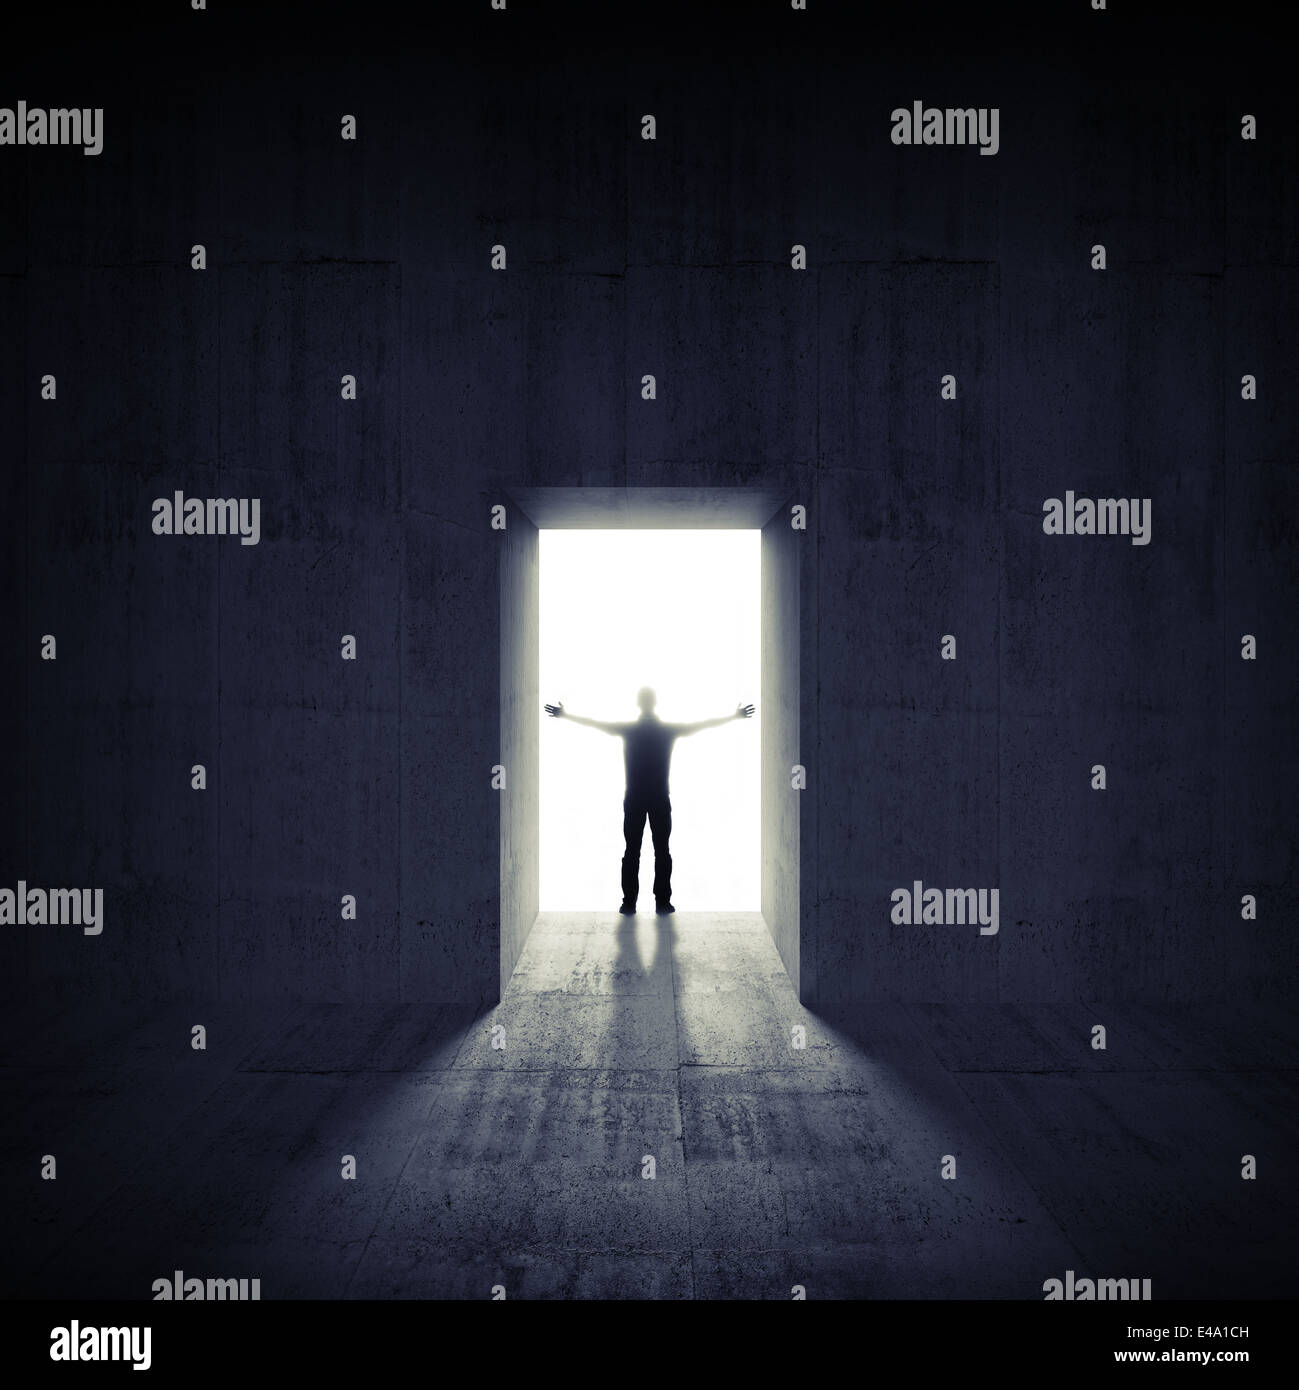 Abstract dark concrete interior with glowing door and man silhouette Stock Photo